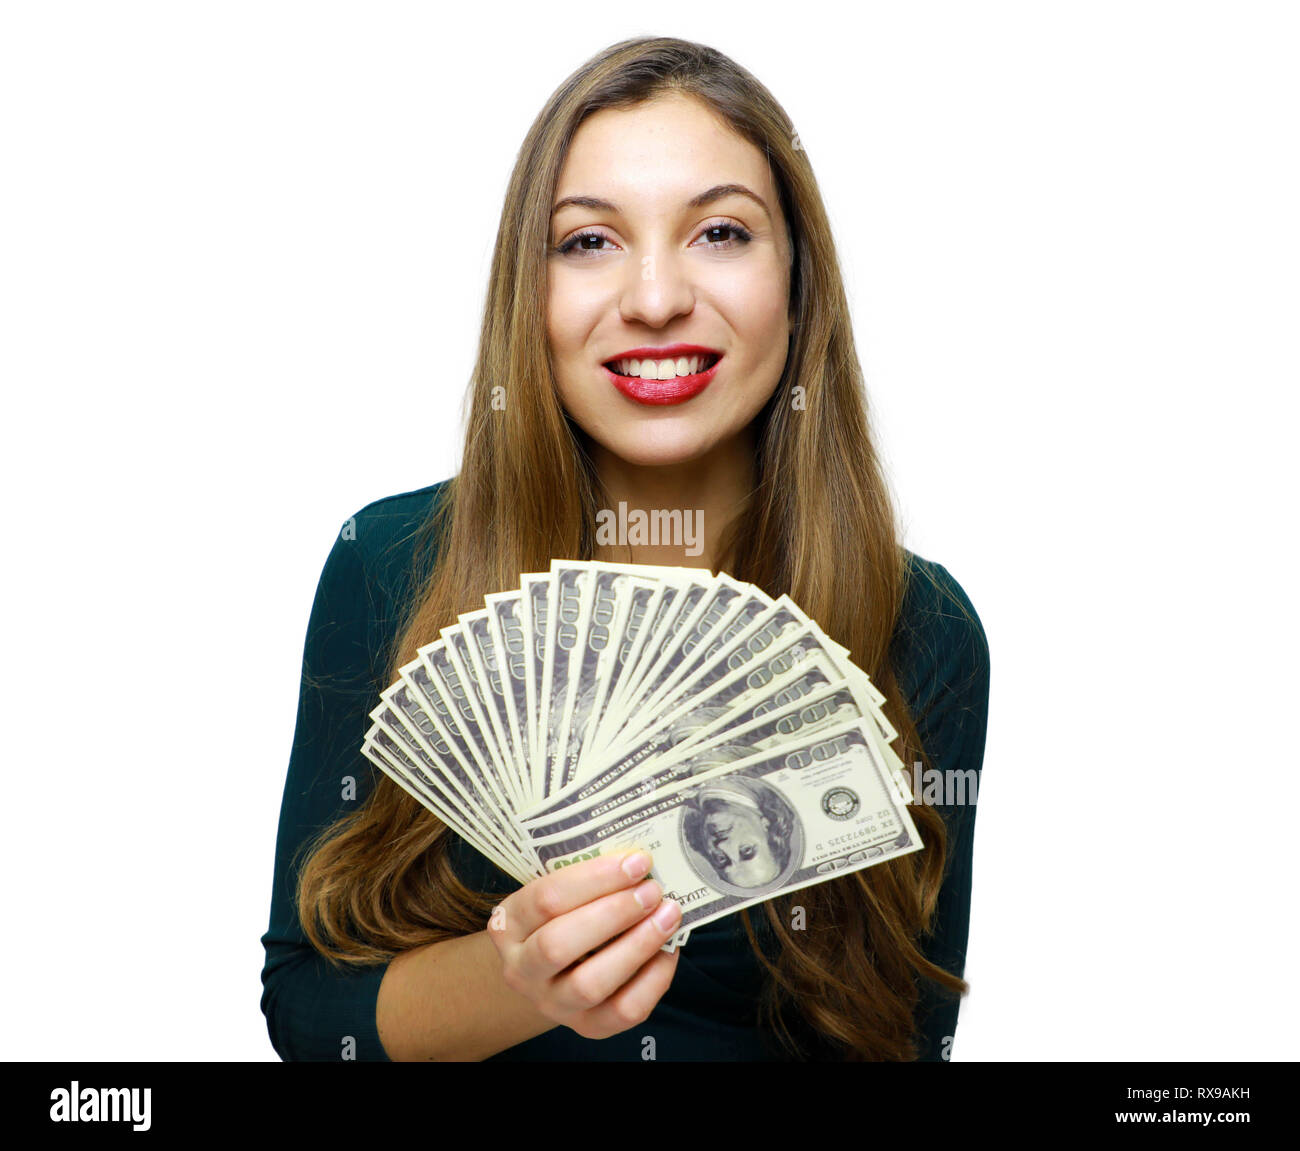 Premium Photo  Woman smiling with white teeth and holding lots of money in  dollar currency